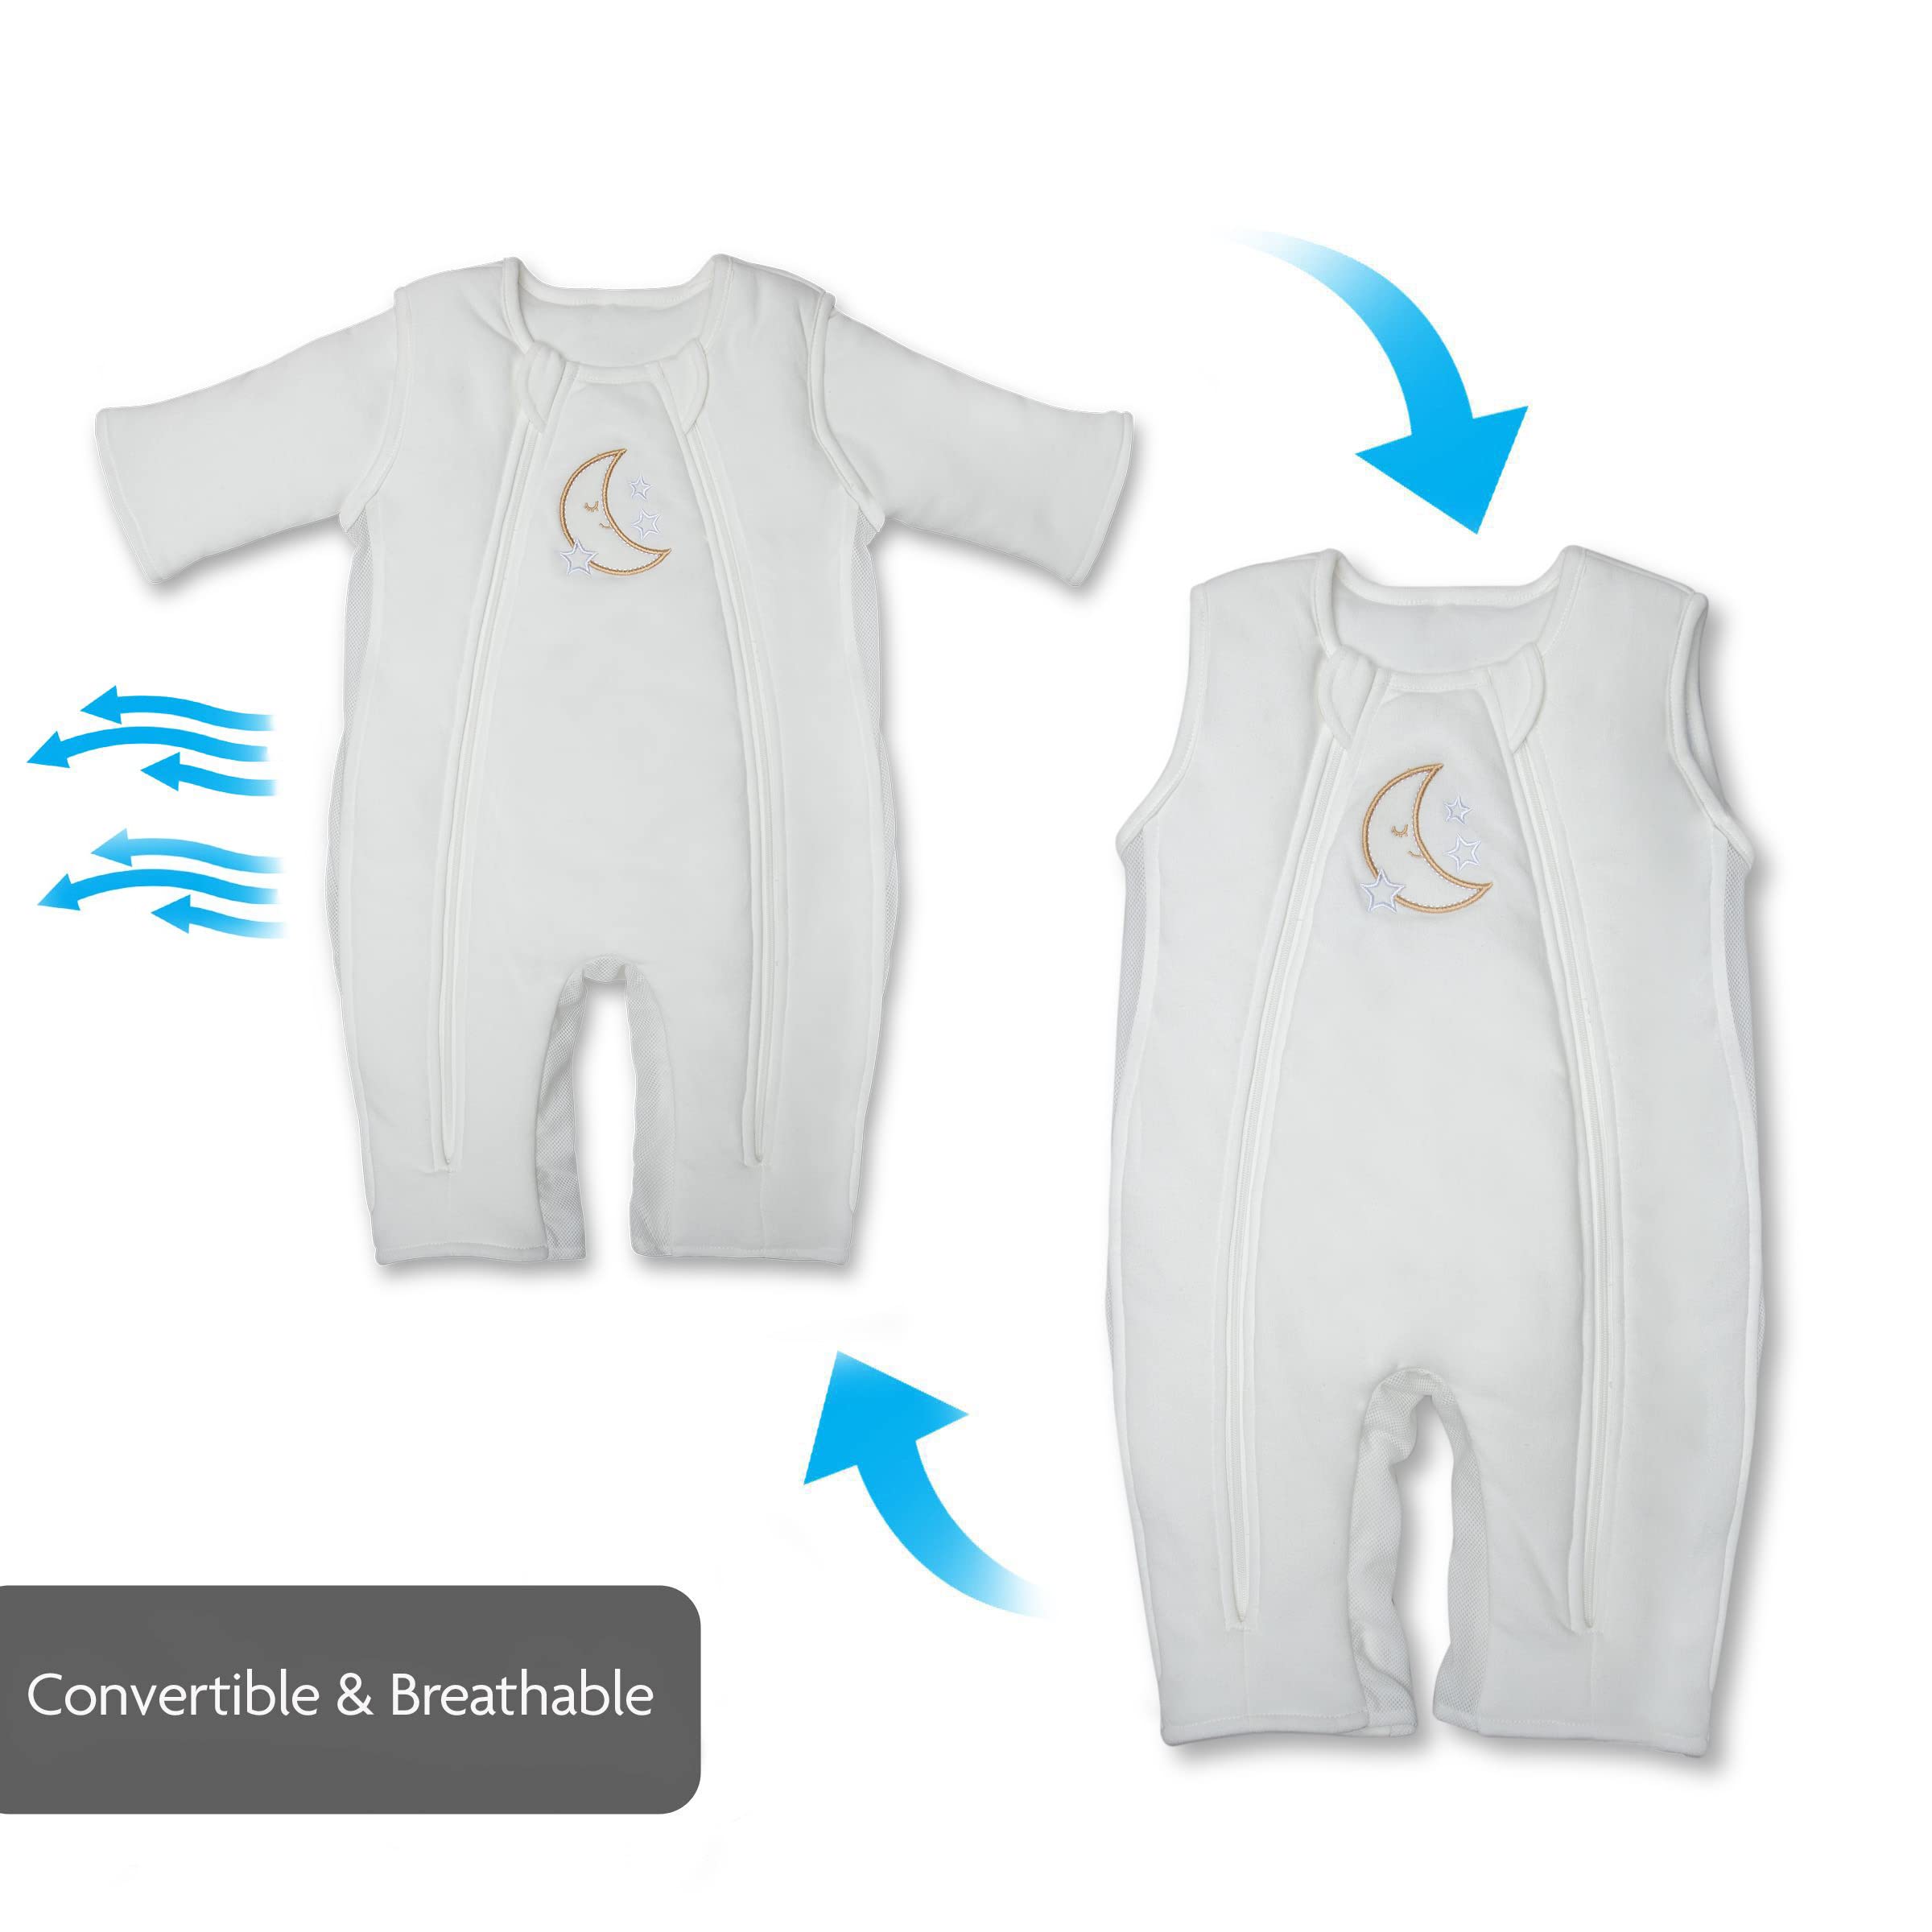 Baby Brezza 2-in-1 Double Zipper Baby Sleepsuit - Unique Swaddle Transition Sleepsuit - Breathable with Mesh Panels - Converts from Sleepsuit to Sleep Vest, 3-6 Months, Cream